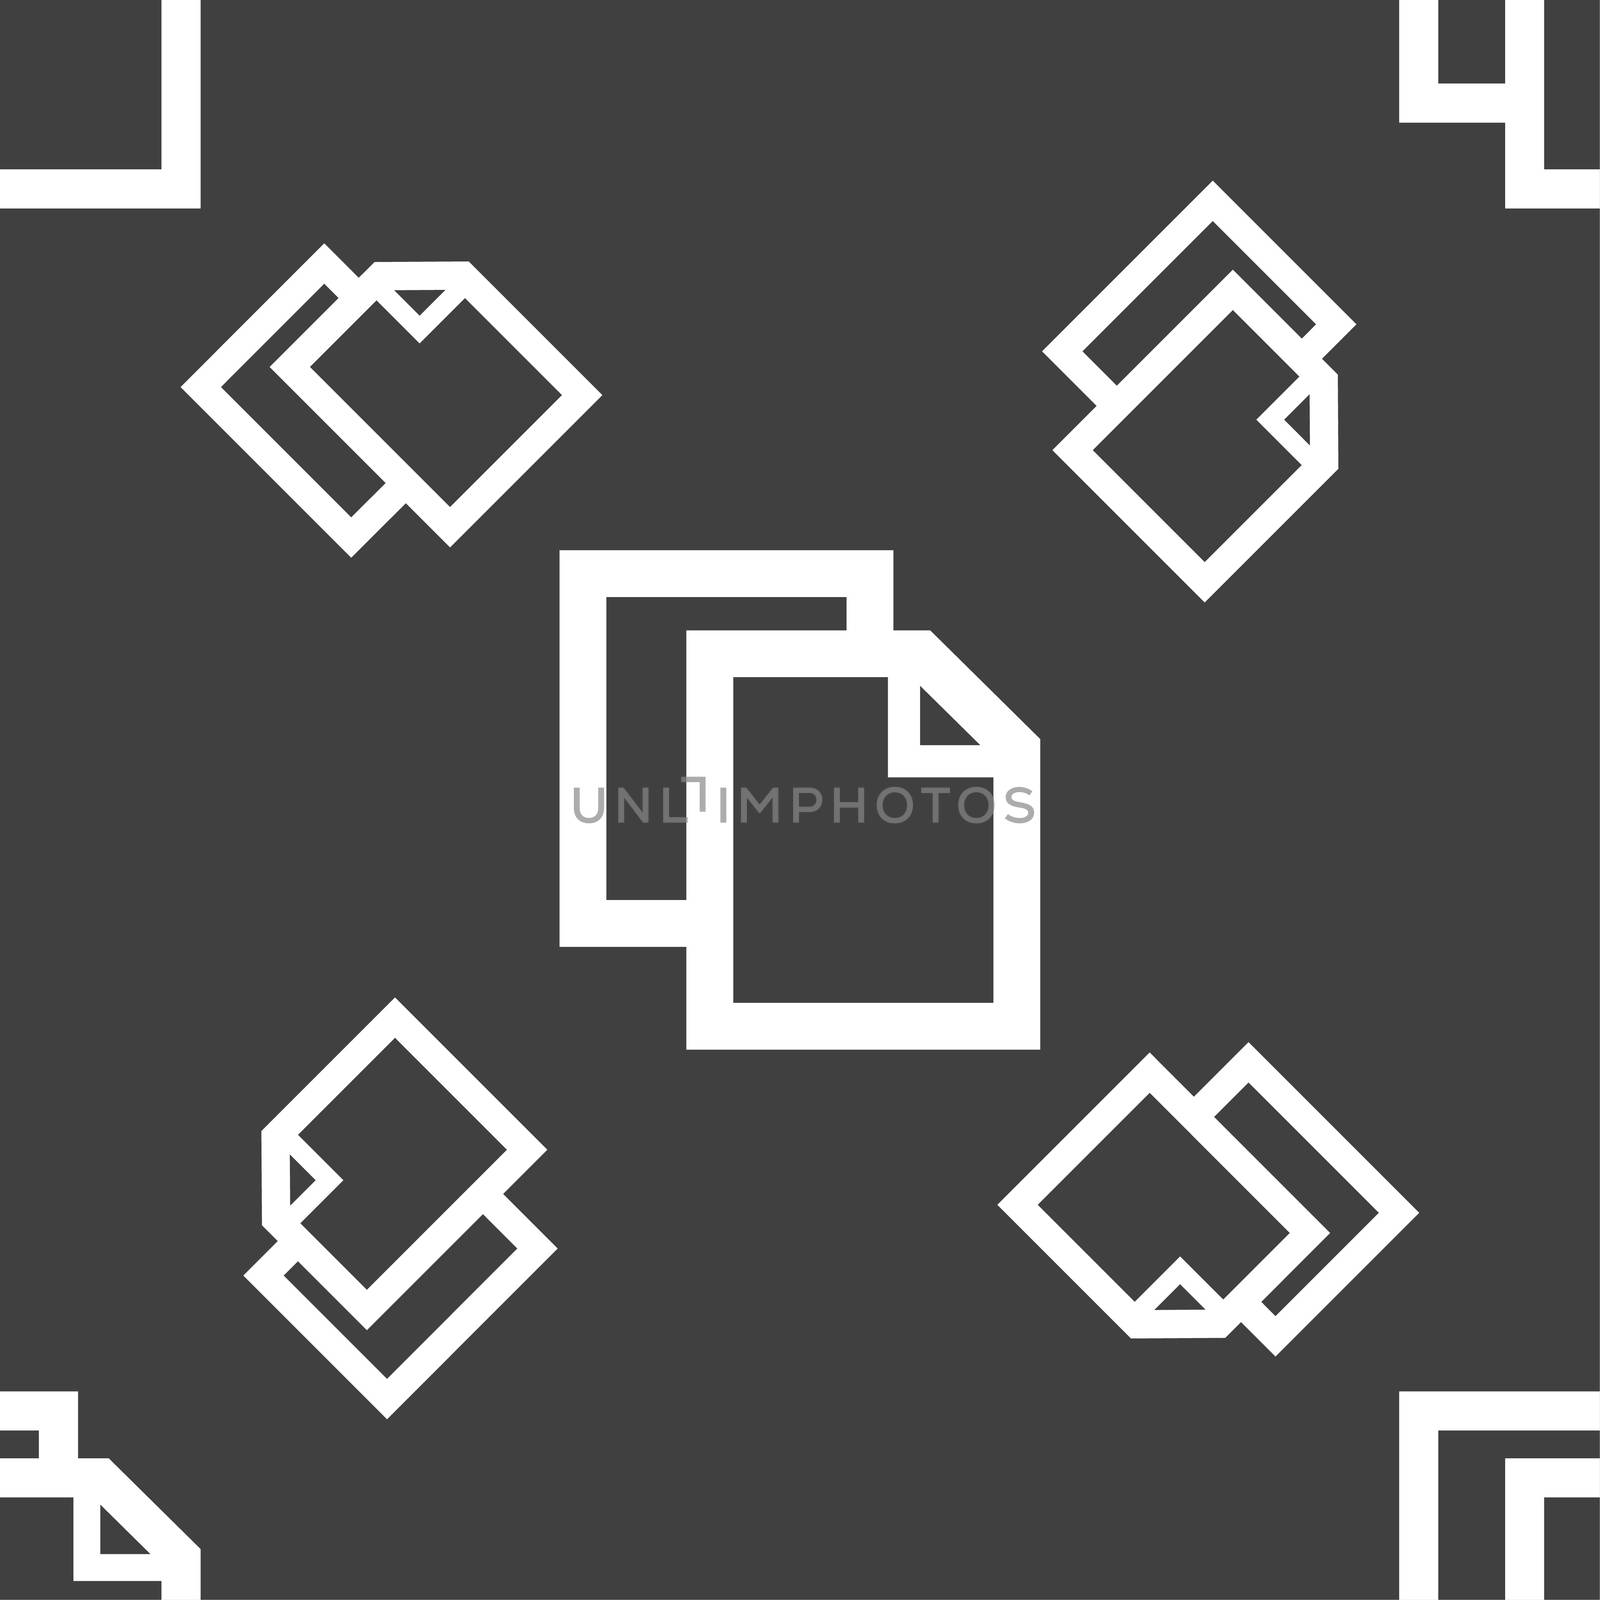 Edit document sign icon. content button.. Seamless pattern on a gray background. illustration